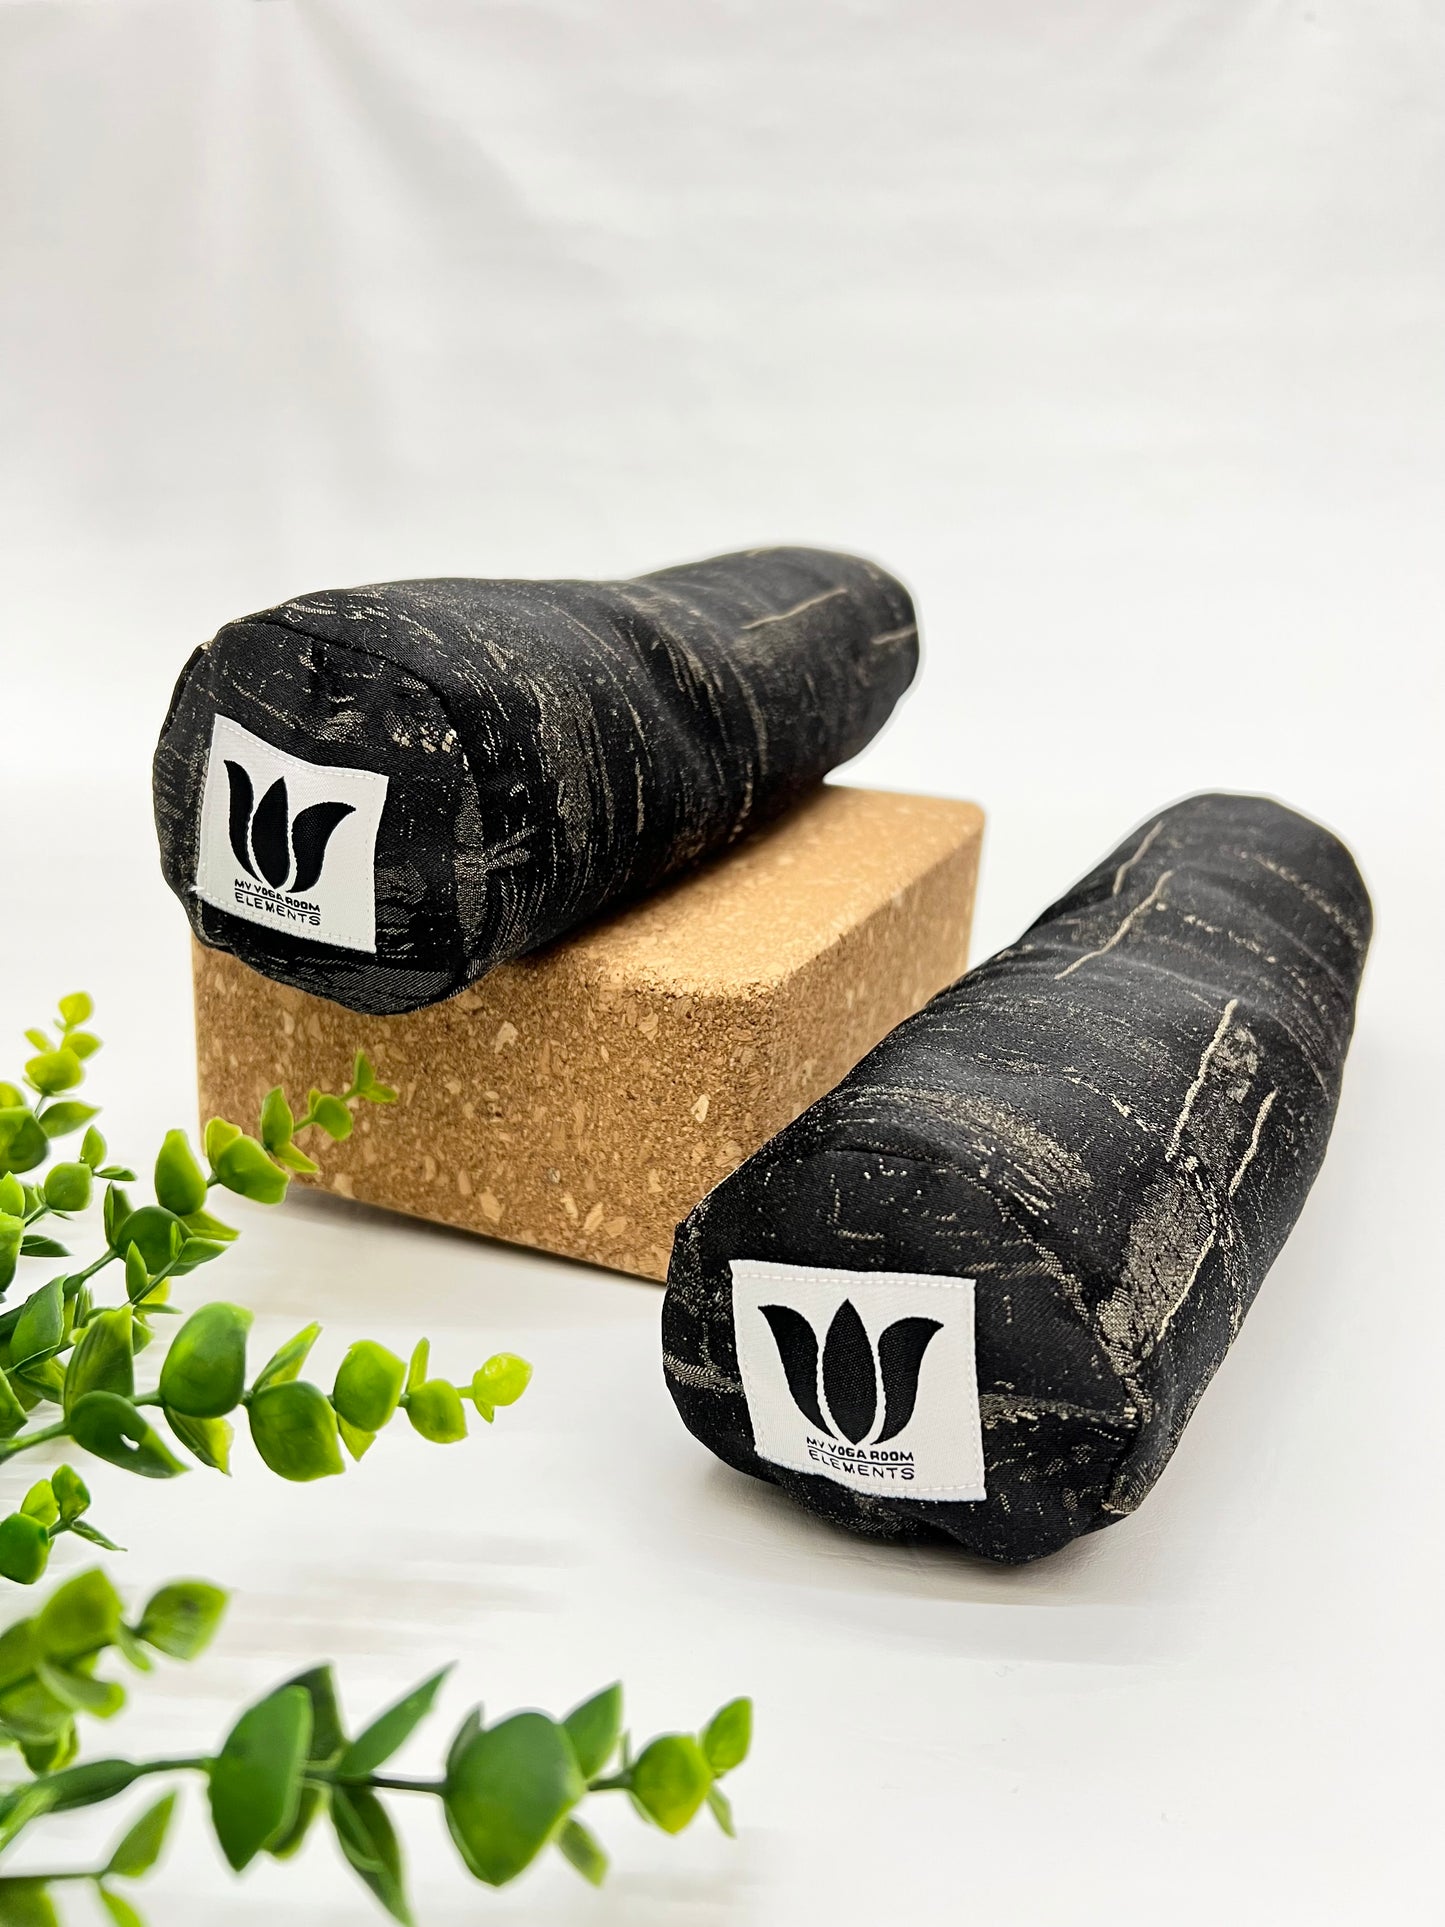 Mini yoga bolster in durable fabric, black and beige hatch print fabric. Cushion and support the body in the practice of yoga and meditation.Removeable cover. Made in Canada by My Yoga Room Elements